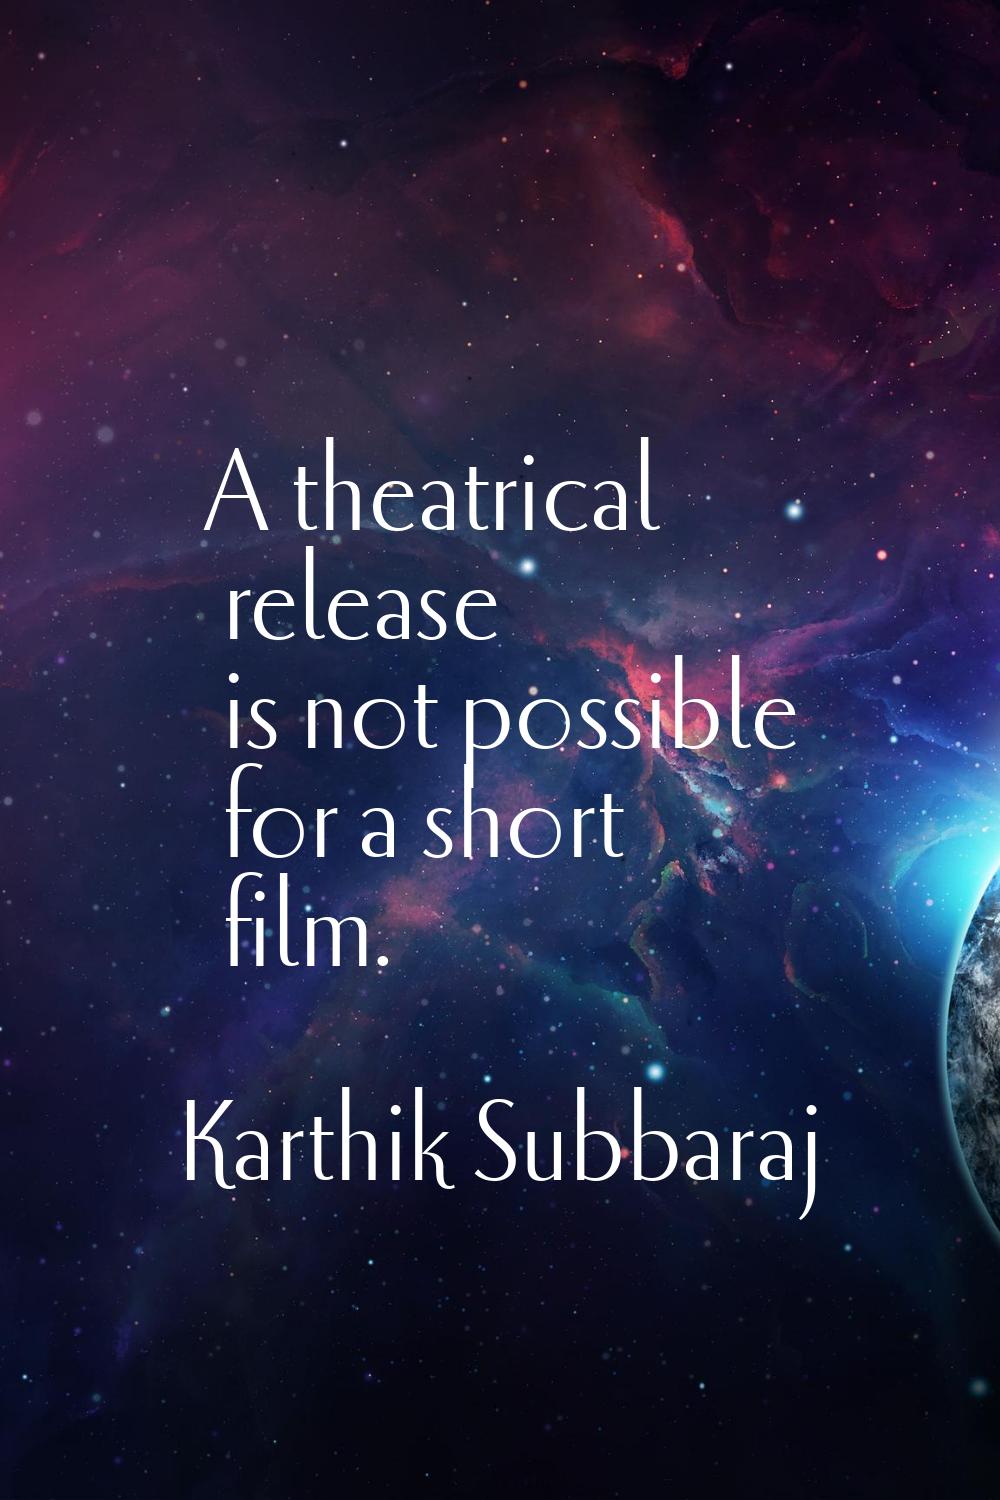 A theatrical release is not possible for a short film.